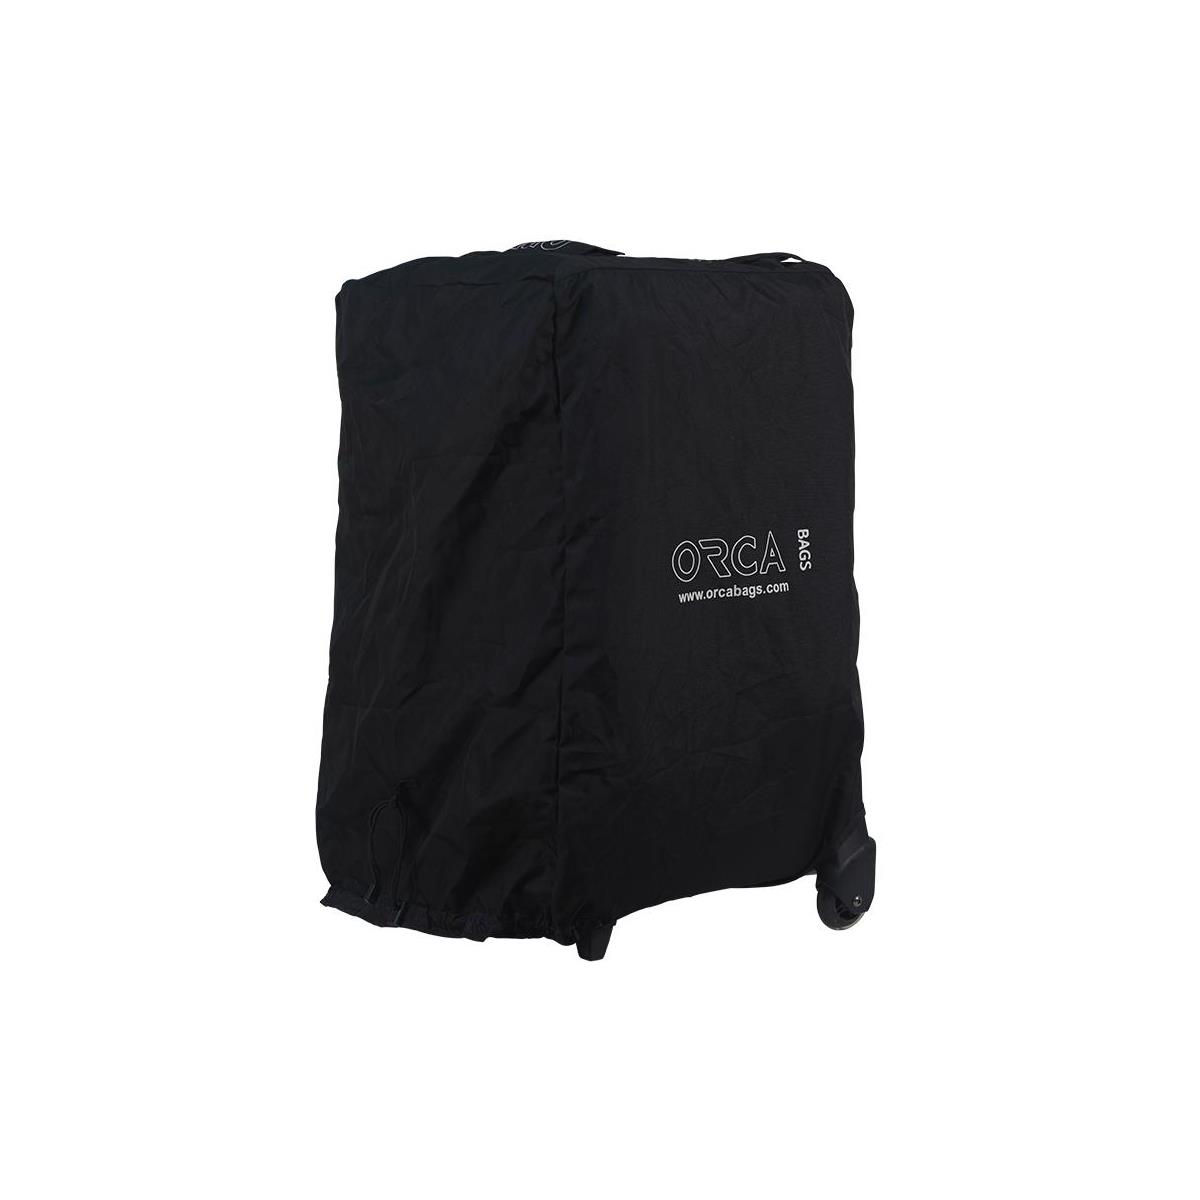 Image of Orca OR-110 Protective Cover for OR-48 Accessory Bag